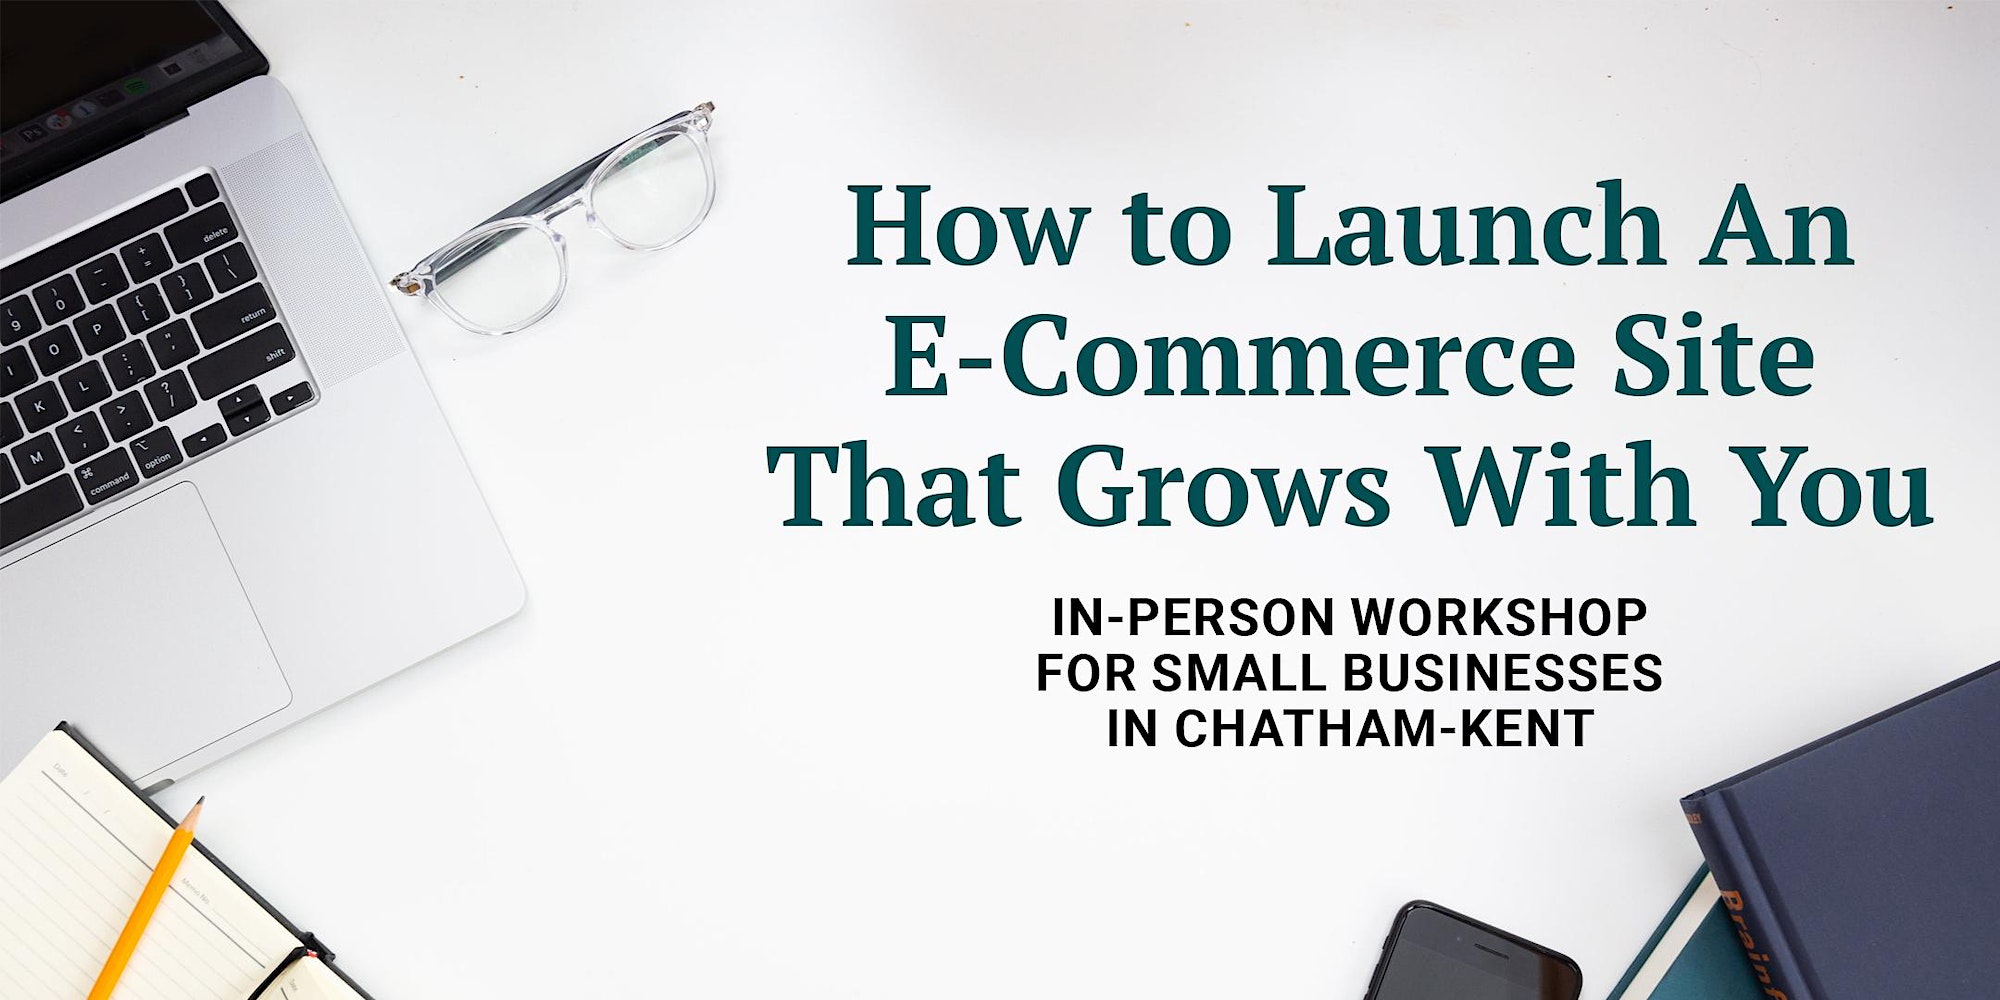 How to Launch an E-Commerce Site That Grows With You